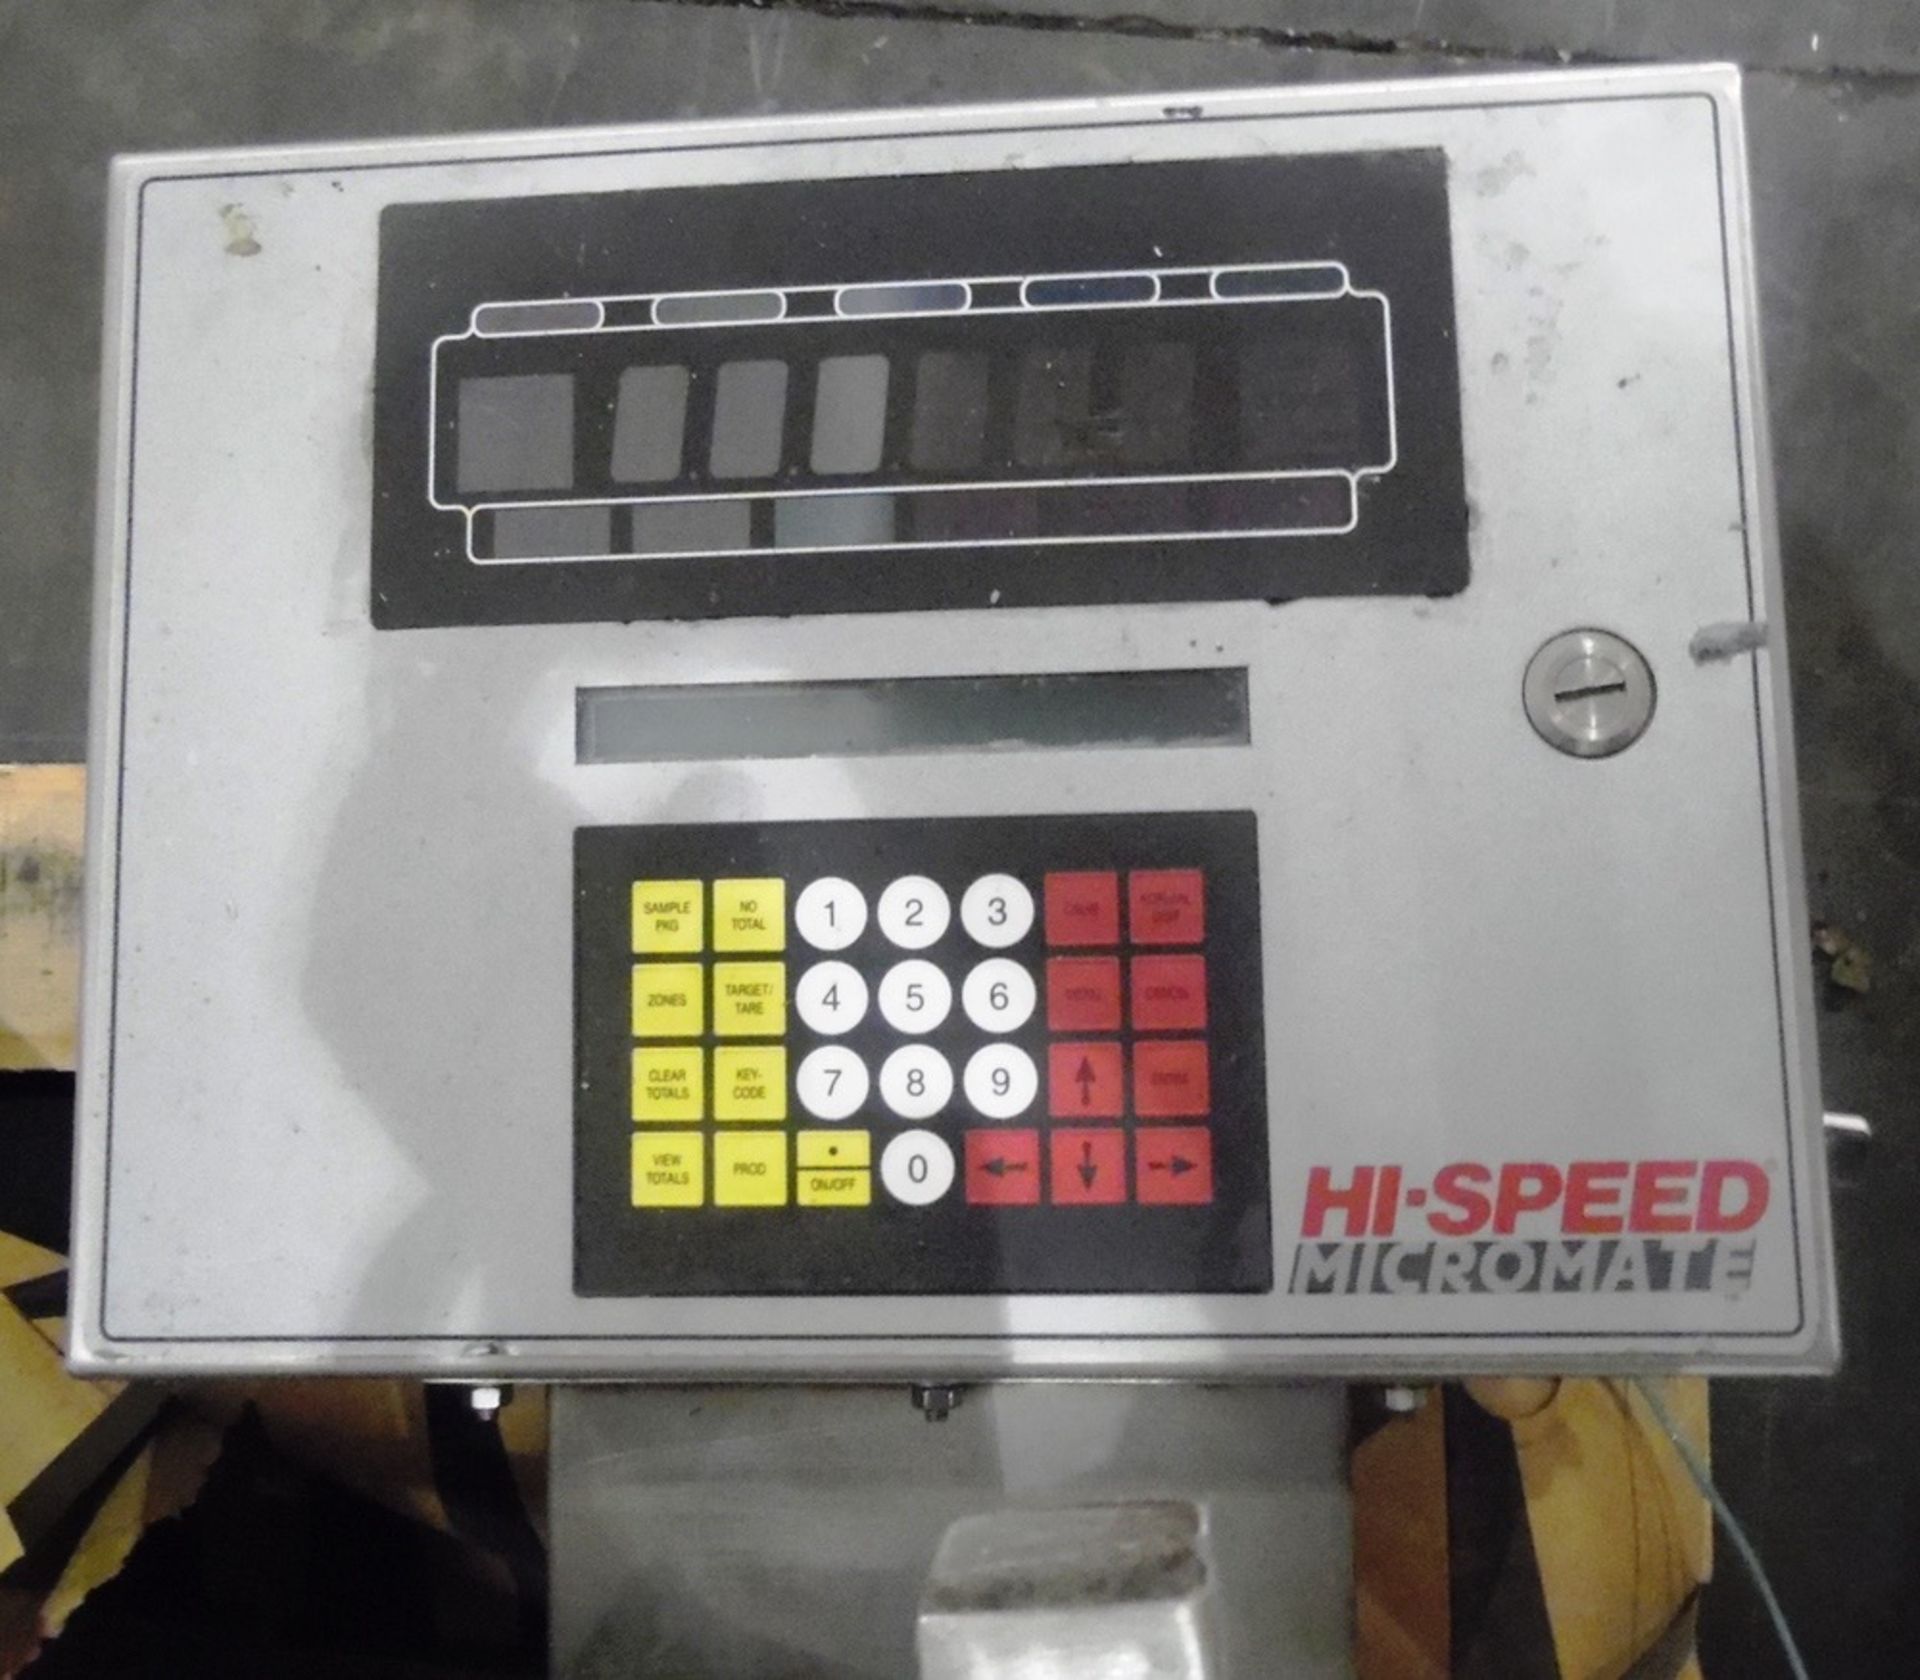 Hi-Speed Micro Mate Checkweigher, Maximum Weight Capacity Of 3.30 Pound(1.5 | No Charge for Loading - Image 3 of 3